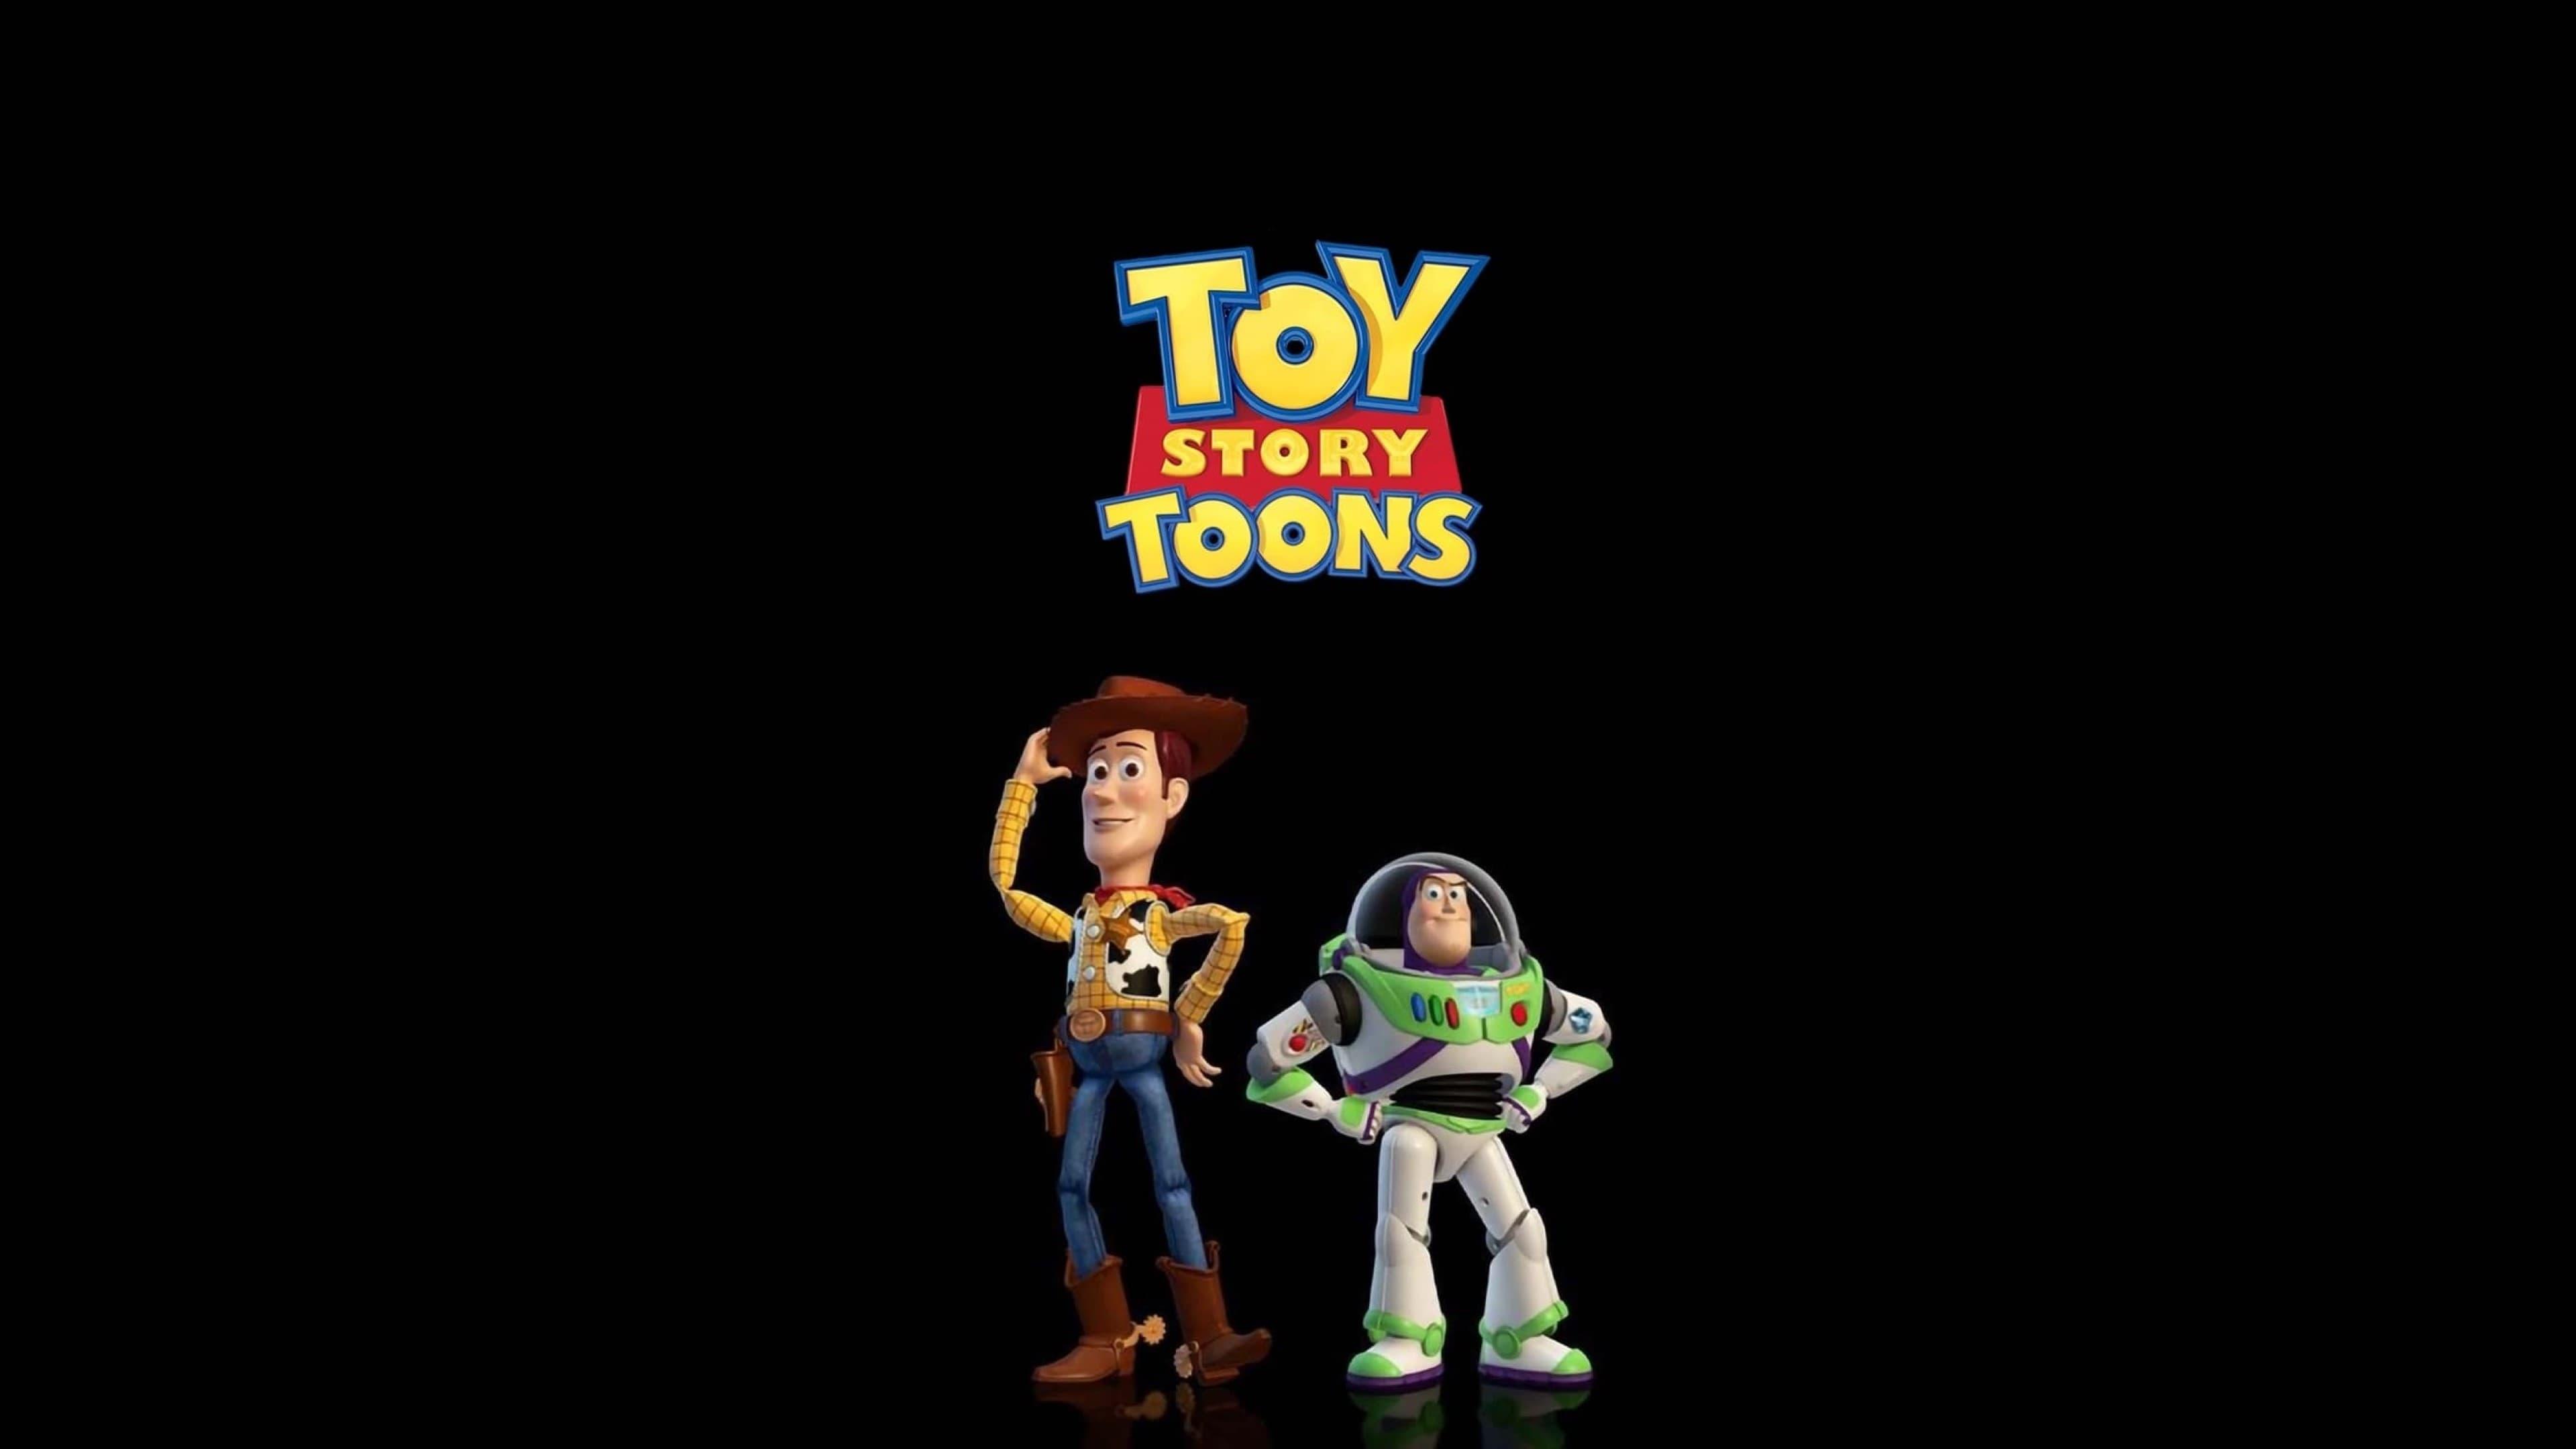 Toy Story Toons backdrop